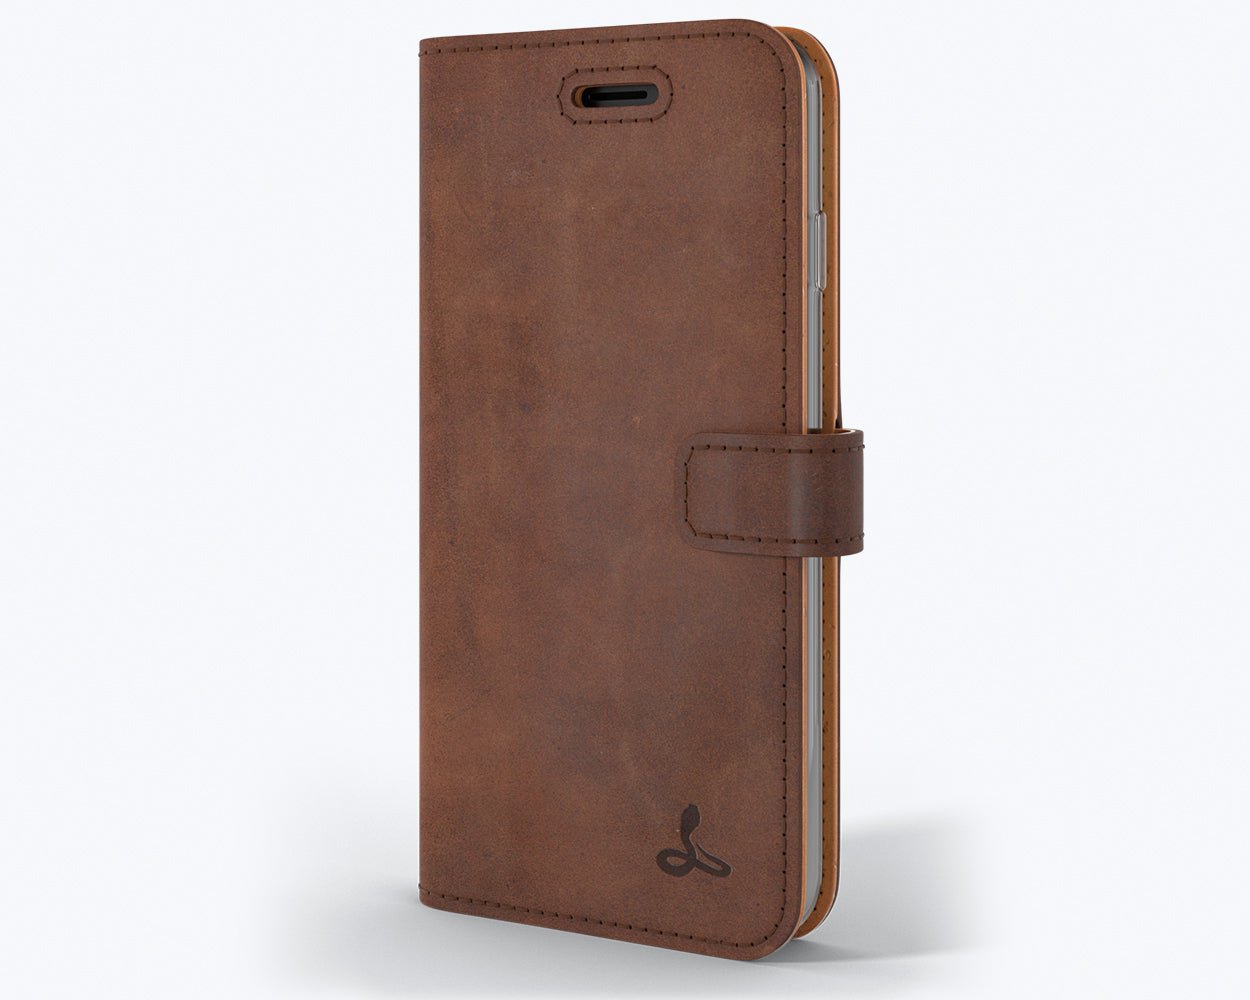 iPhone 8 Leather Cases | FREE UK SHIPPING | 45000+ reviews